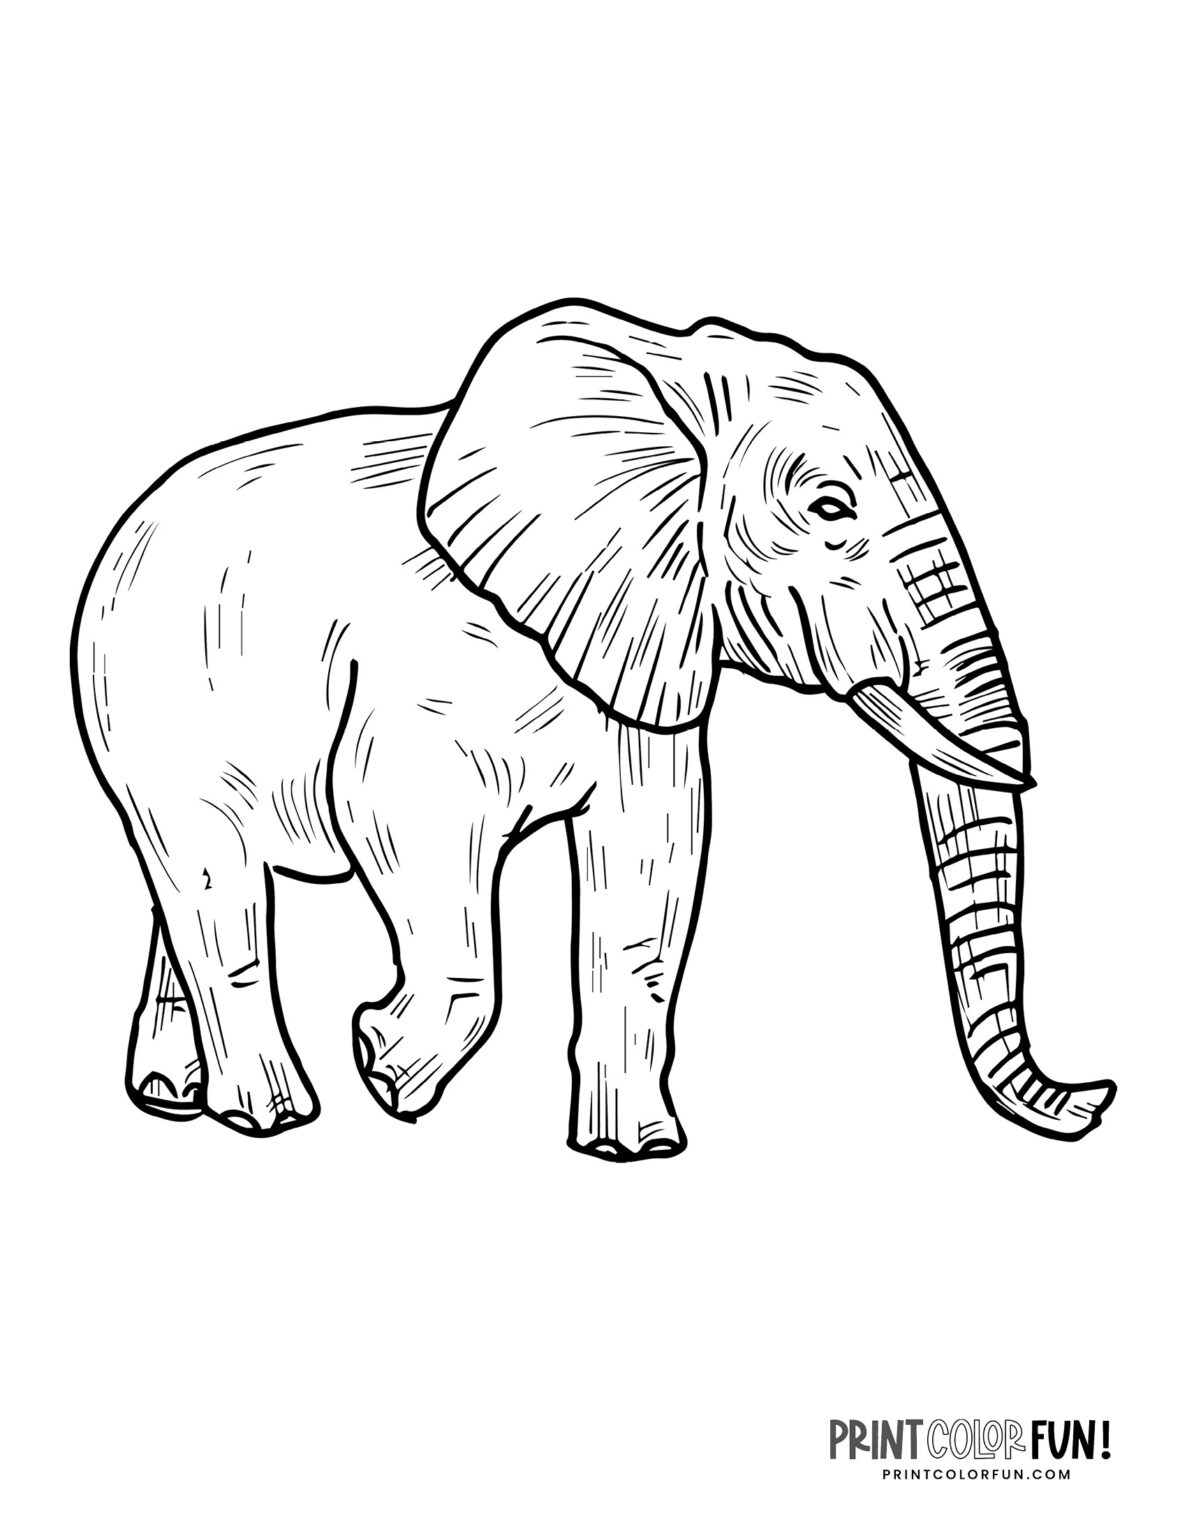 6 realistic elephant coloring pages to print   Print Color Fun